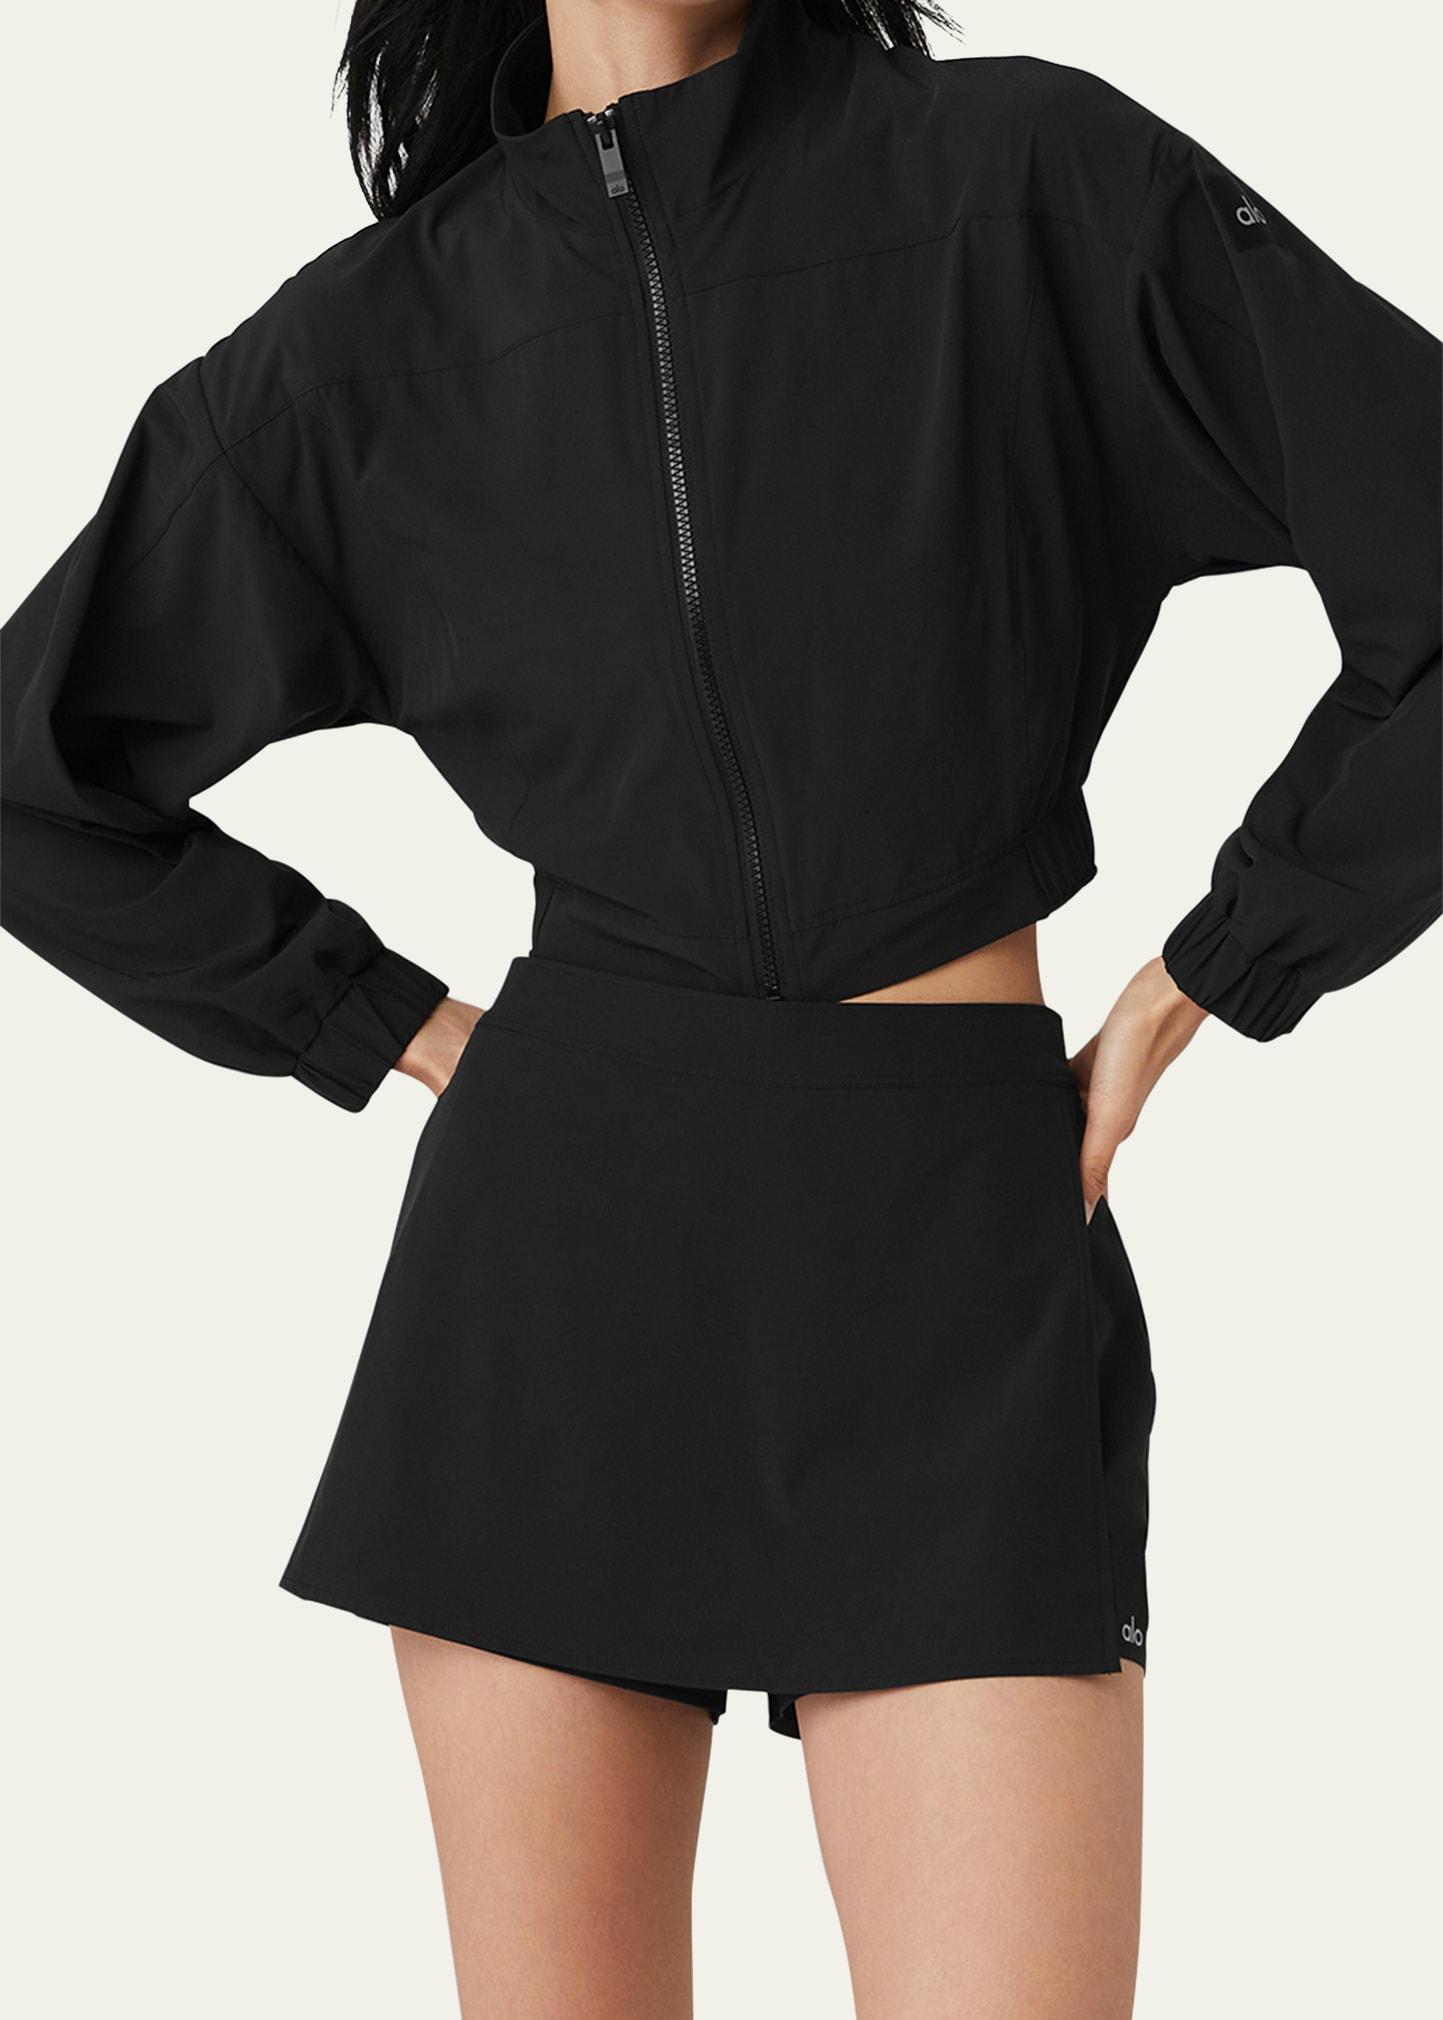 Alo Yoga Clubhouse Cropped Jacket in Black | Lyst